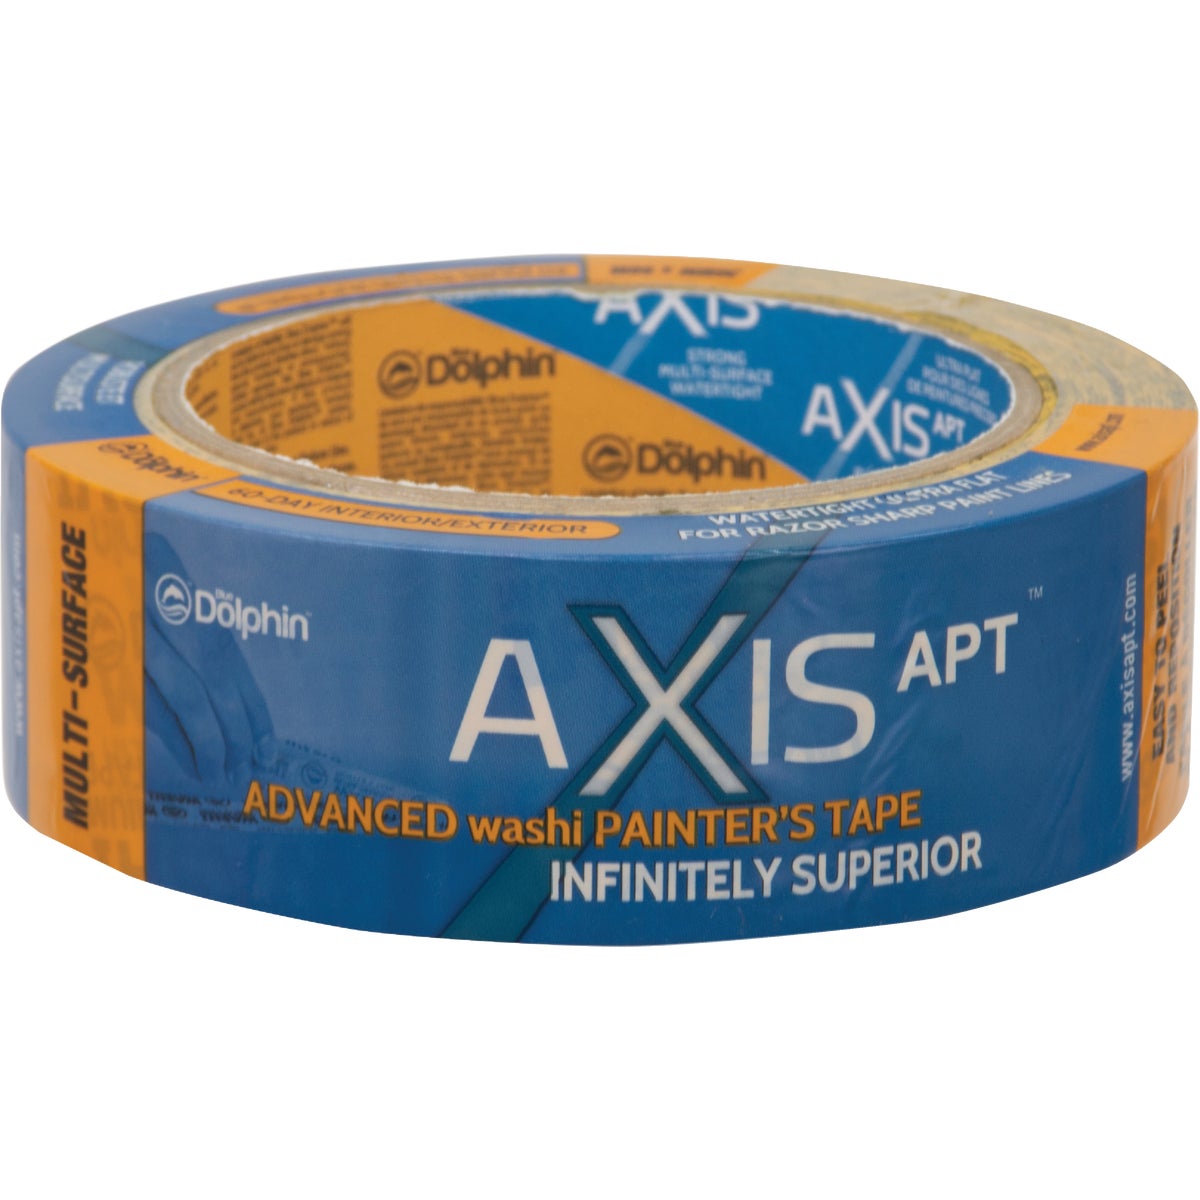 Blue Dolphin Axis APT 1.41 In. x 54.6 Yd. Washi Painter's Tape 